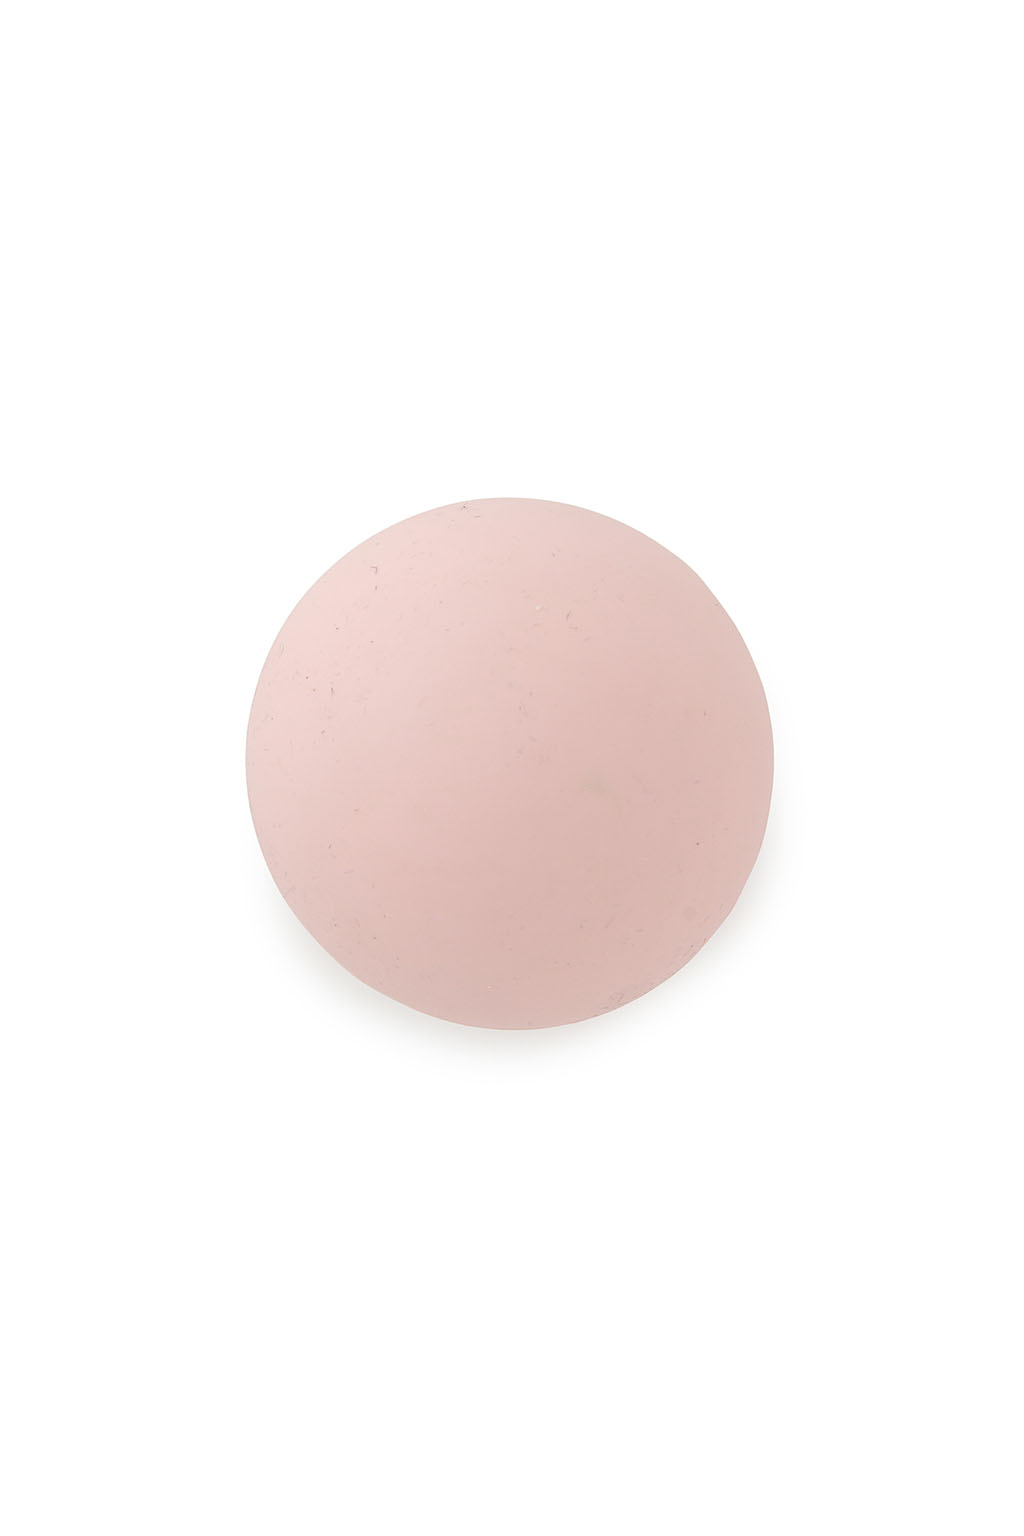 nergy-recovery-ball-white-x-pink-03